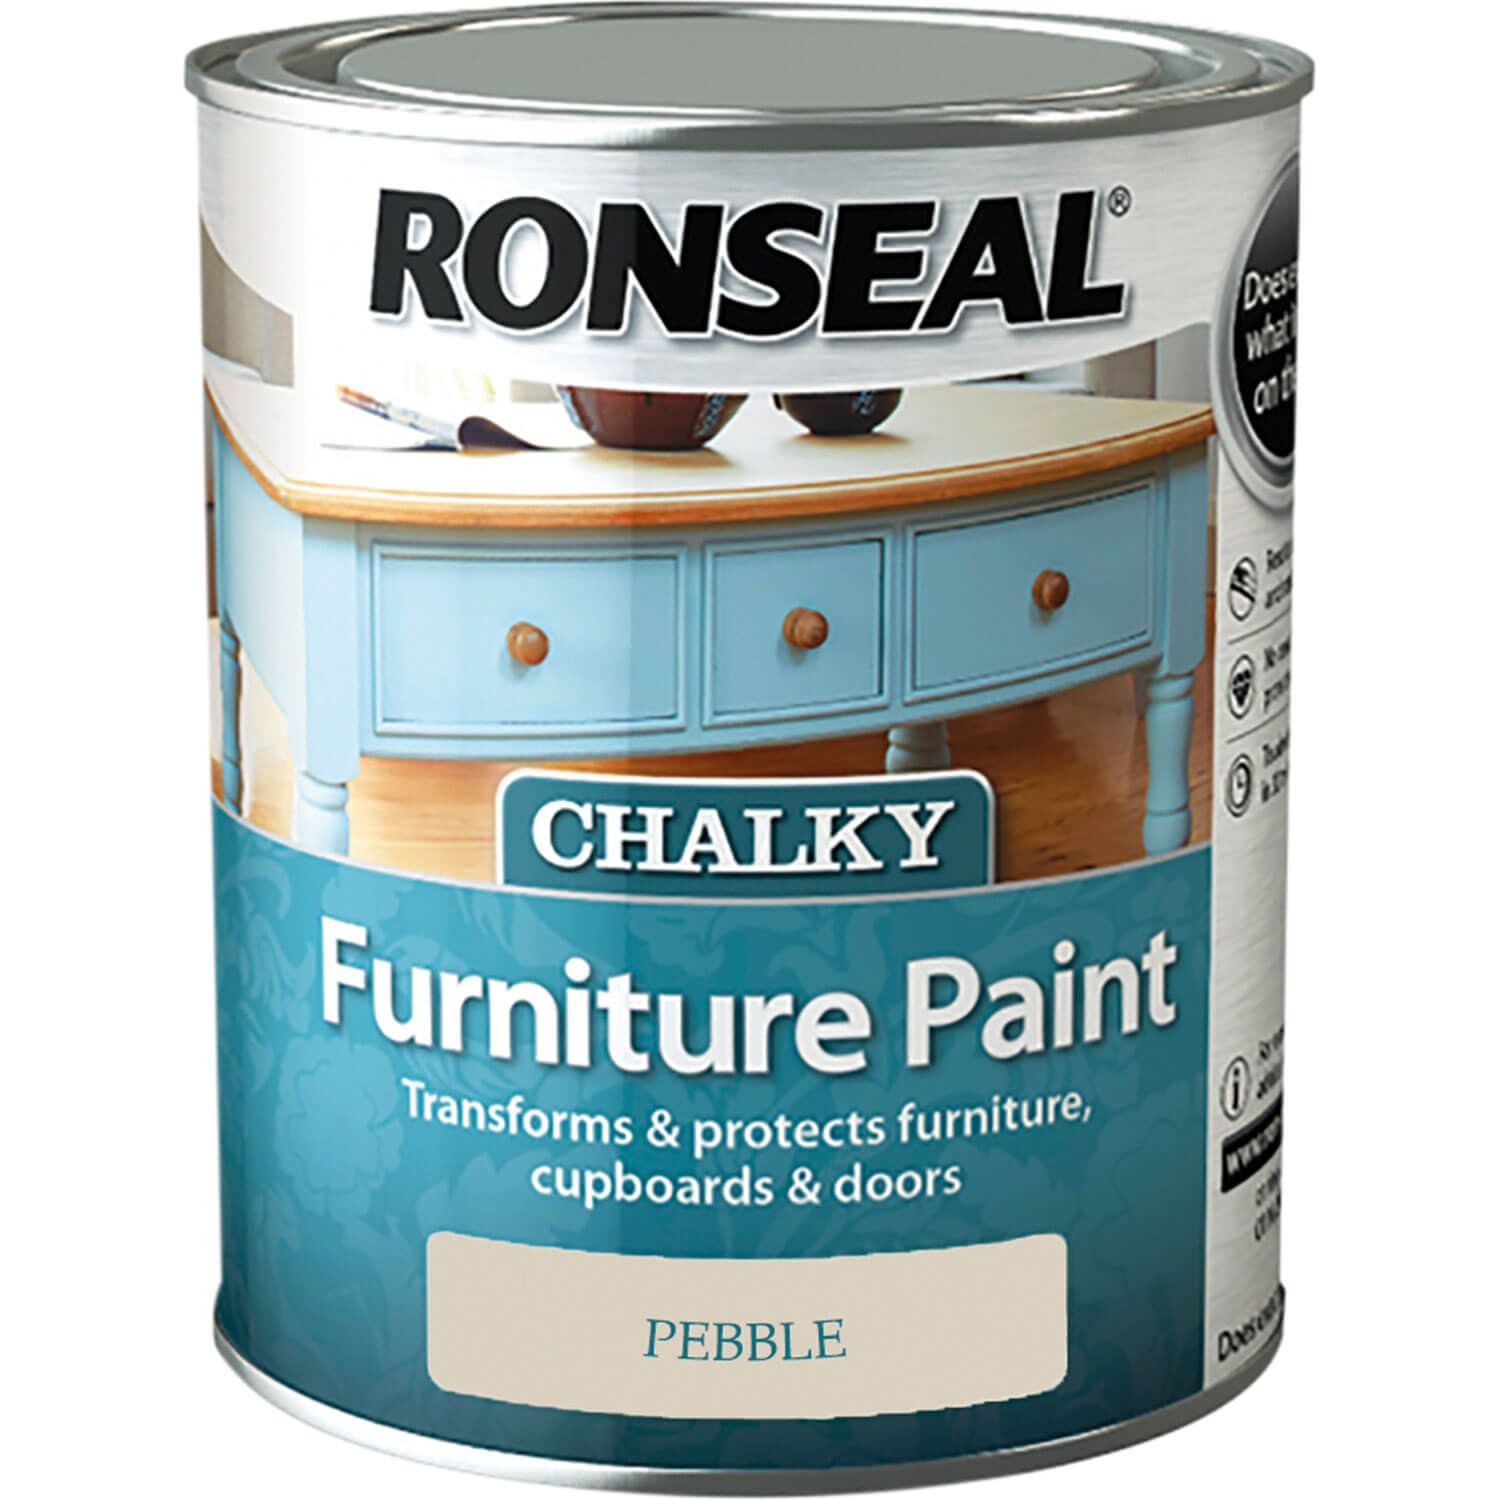 Image of Ronseal Chalky Furniture Paint Pebble 750ml